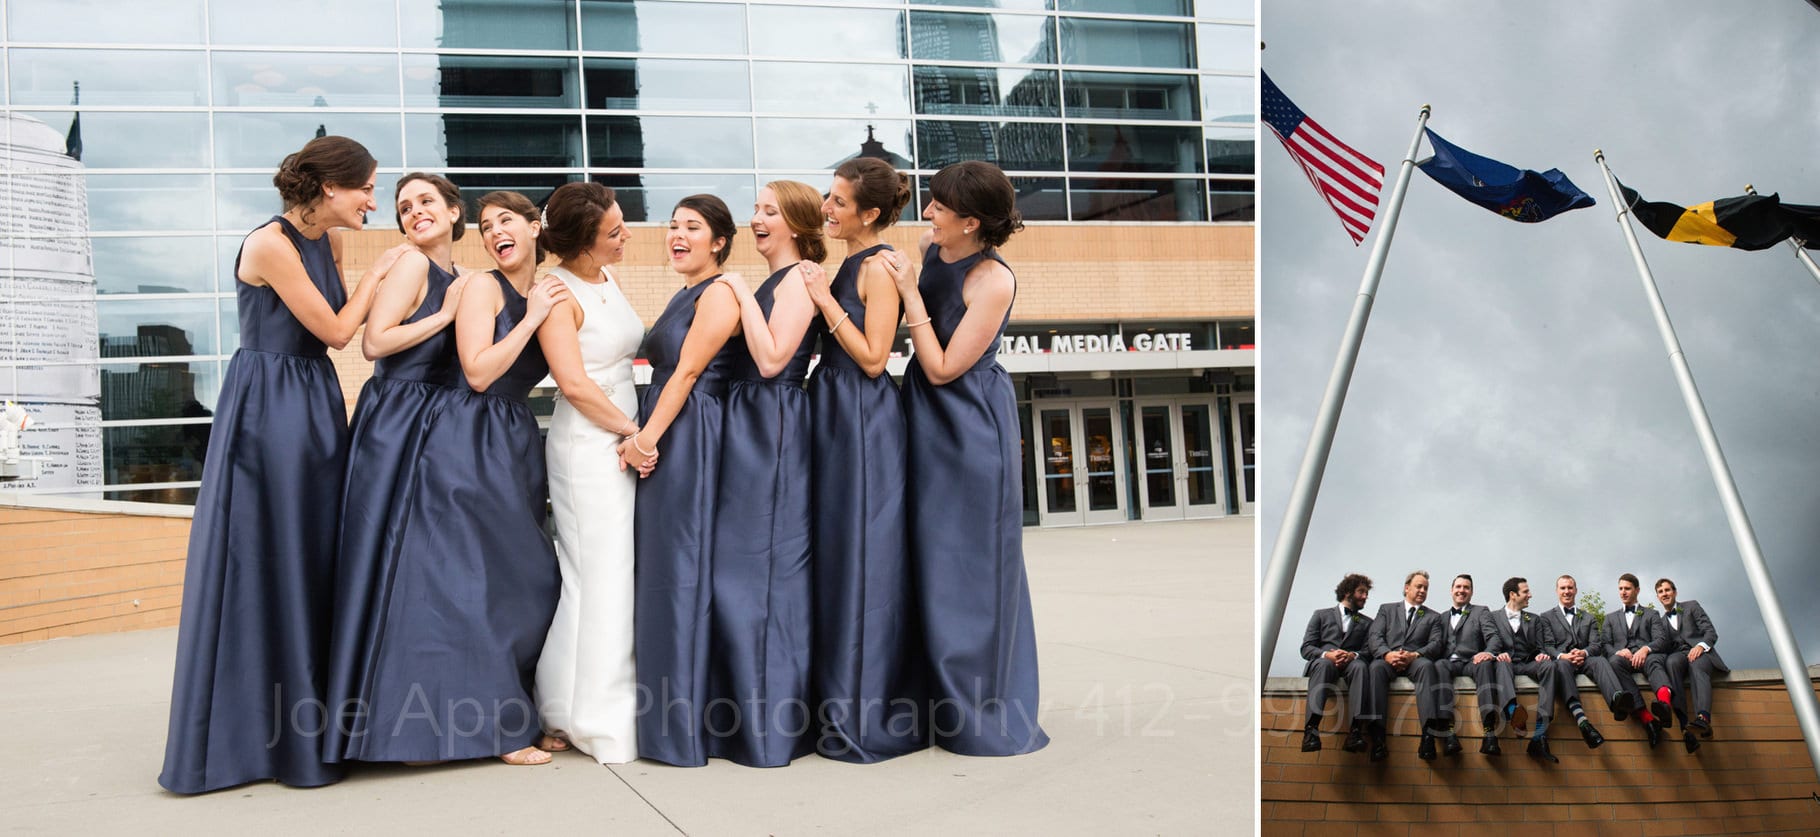 Two photos: one is a bride and her bridesmaids laughing and smiling at each other in front of the Consol Energy Center. The second photo is a group of groomsmen sitting on a wall with dramatic clouds behind them and flags flying above them.